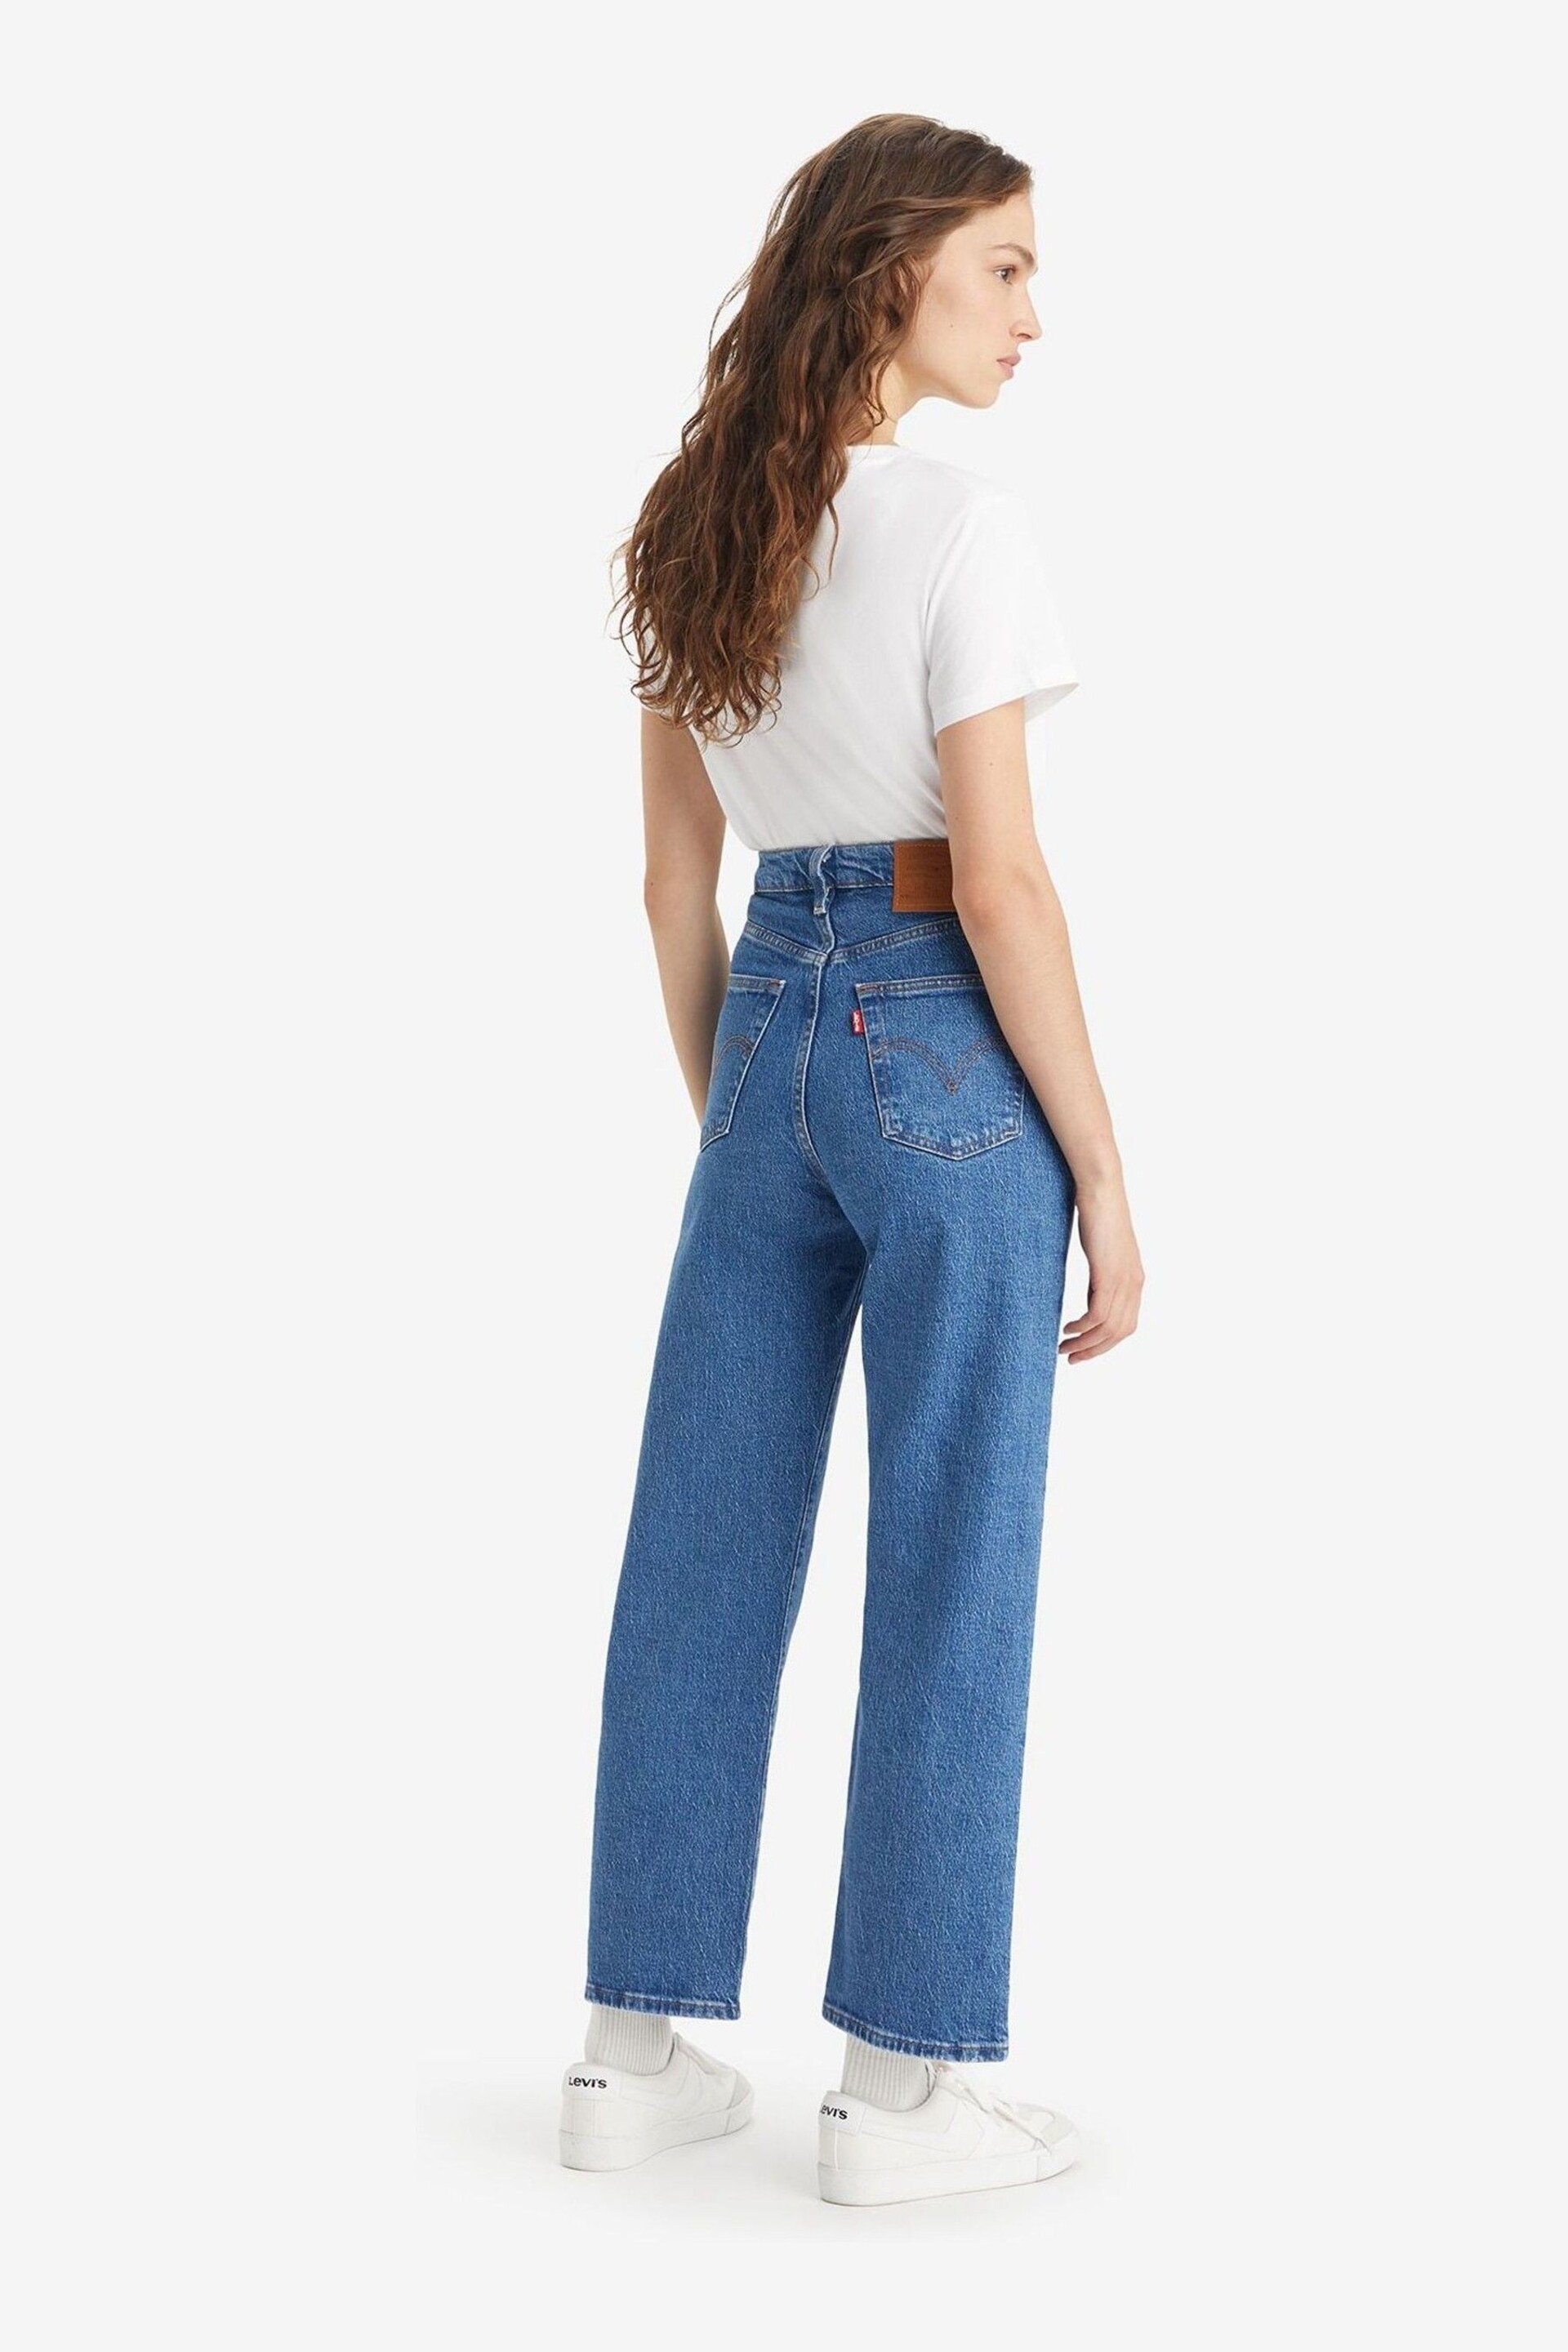 Levi's® Jazz Pop Ribcage Straight Ankle Jeans - Image 2 of 14